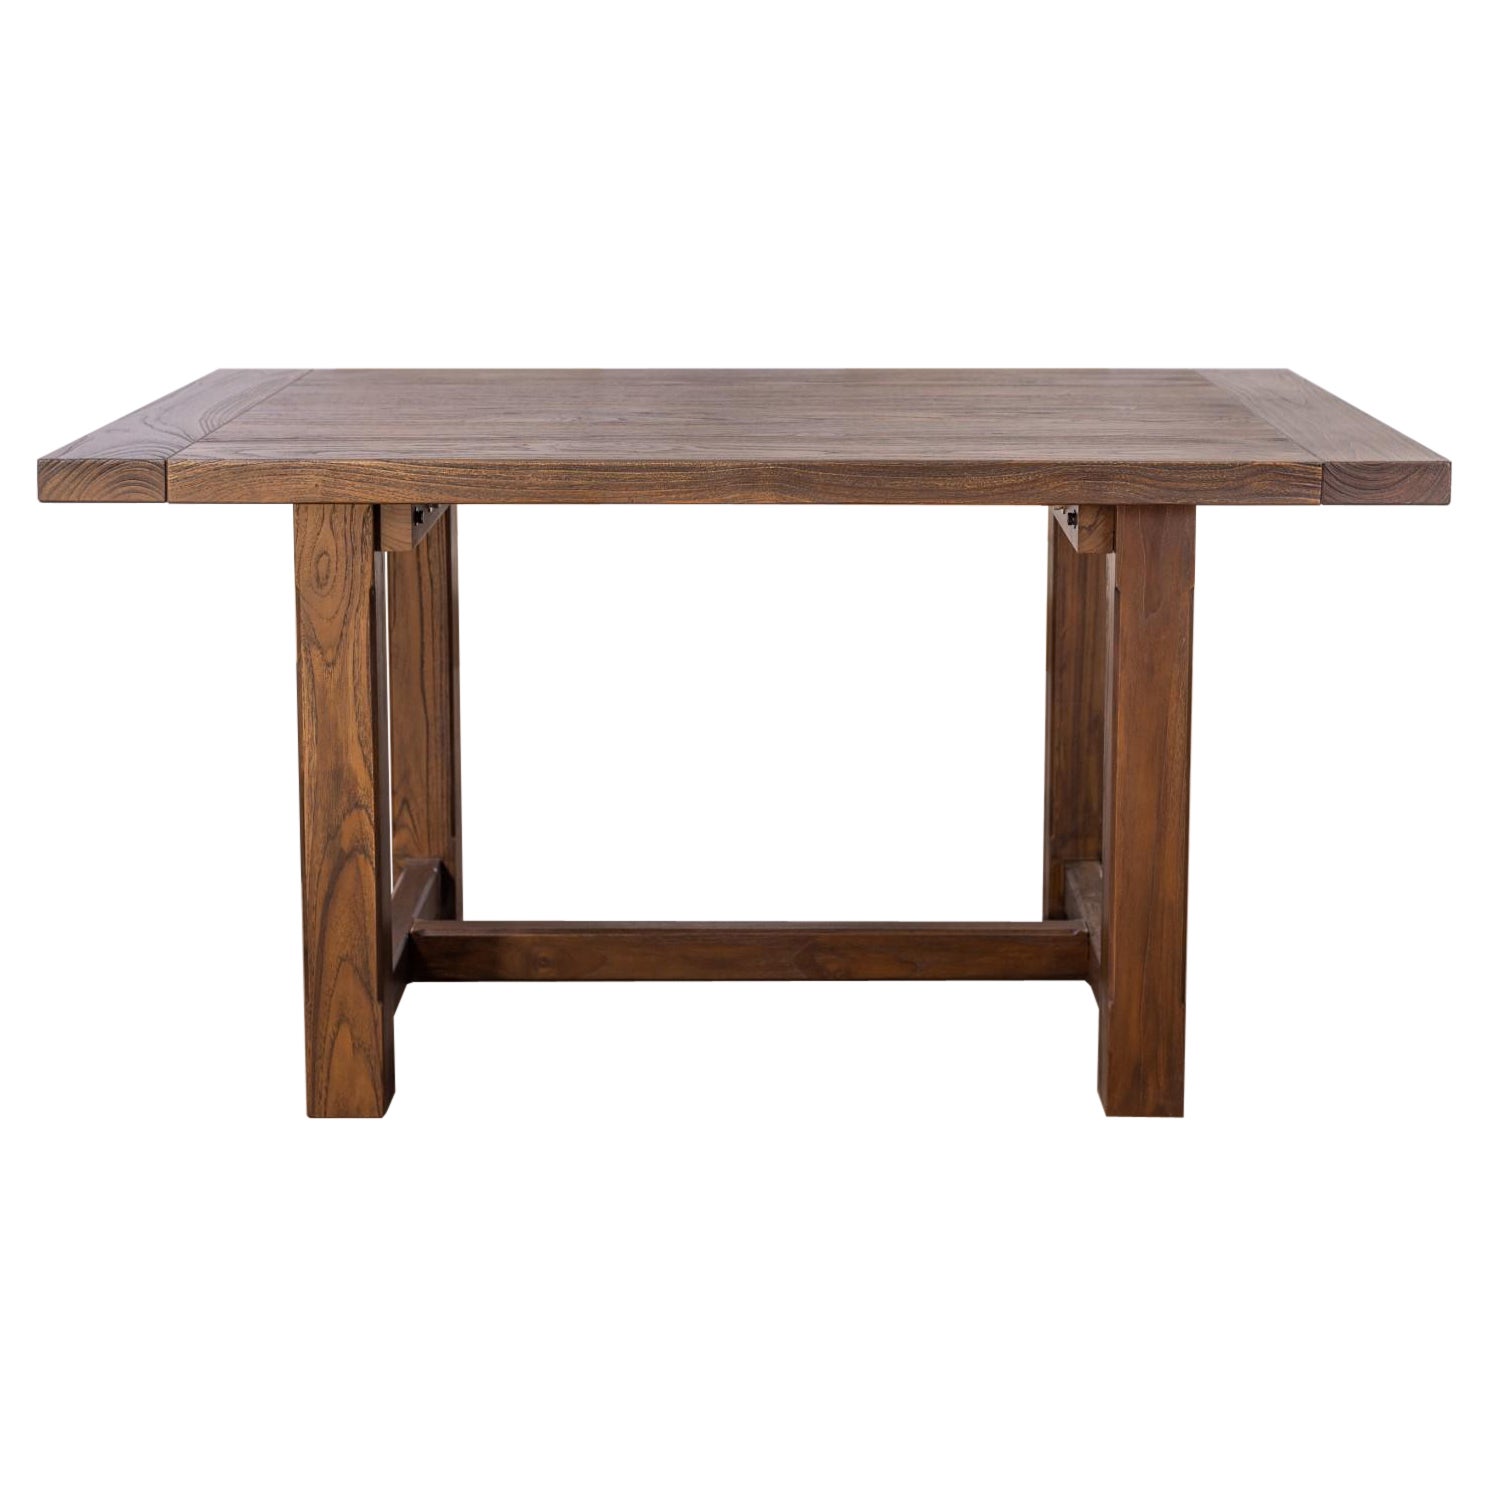 Solid Hardwood Contemporary Farmhouse Dining Table in Sandblasted Teak Cocoa For Sale